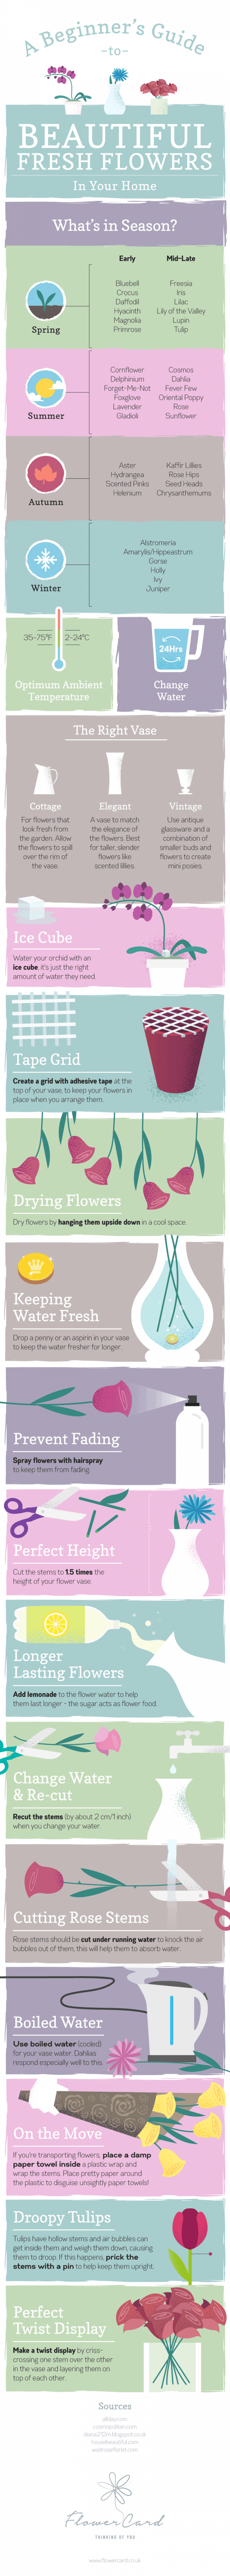 Tips on how to keep flowers in your home